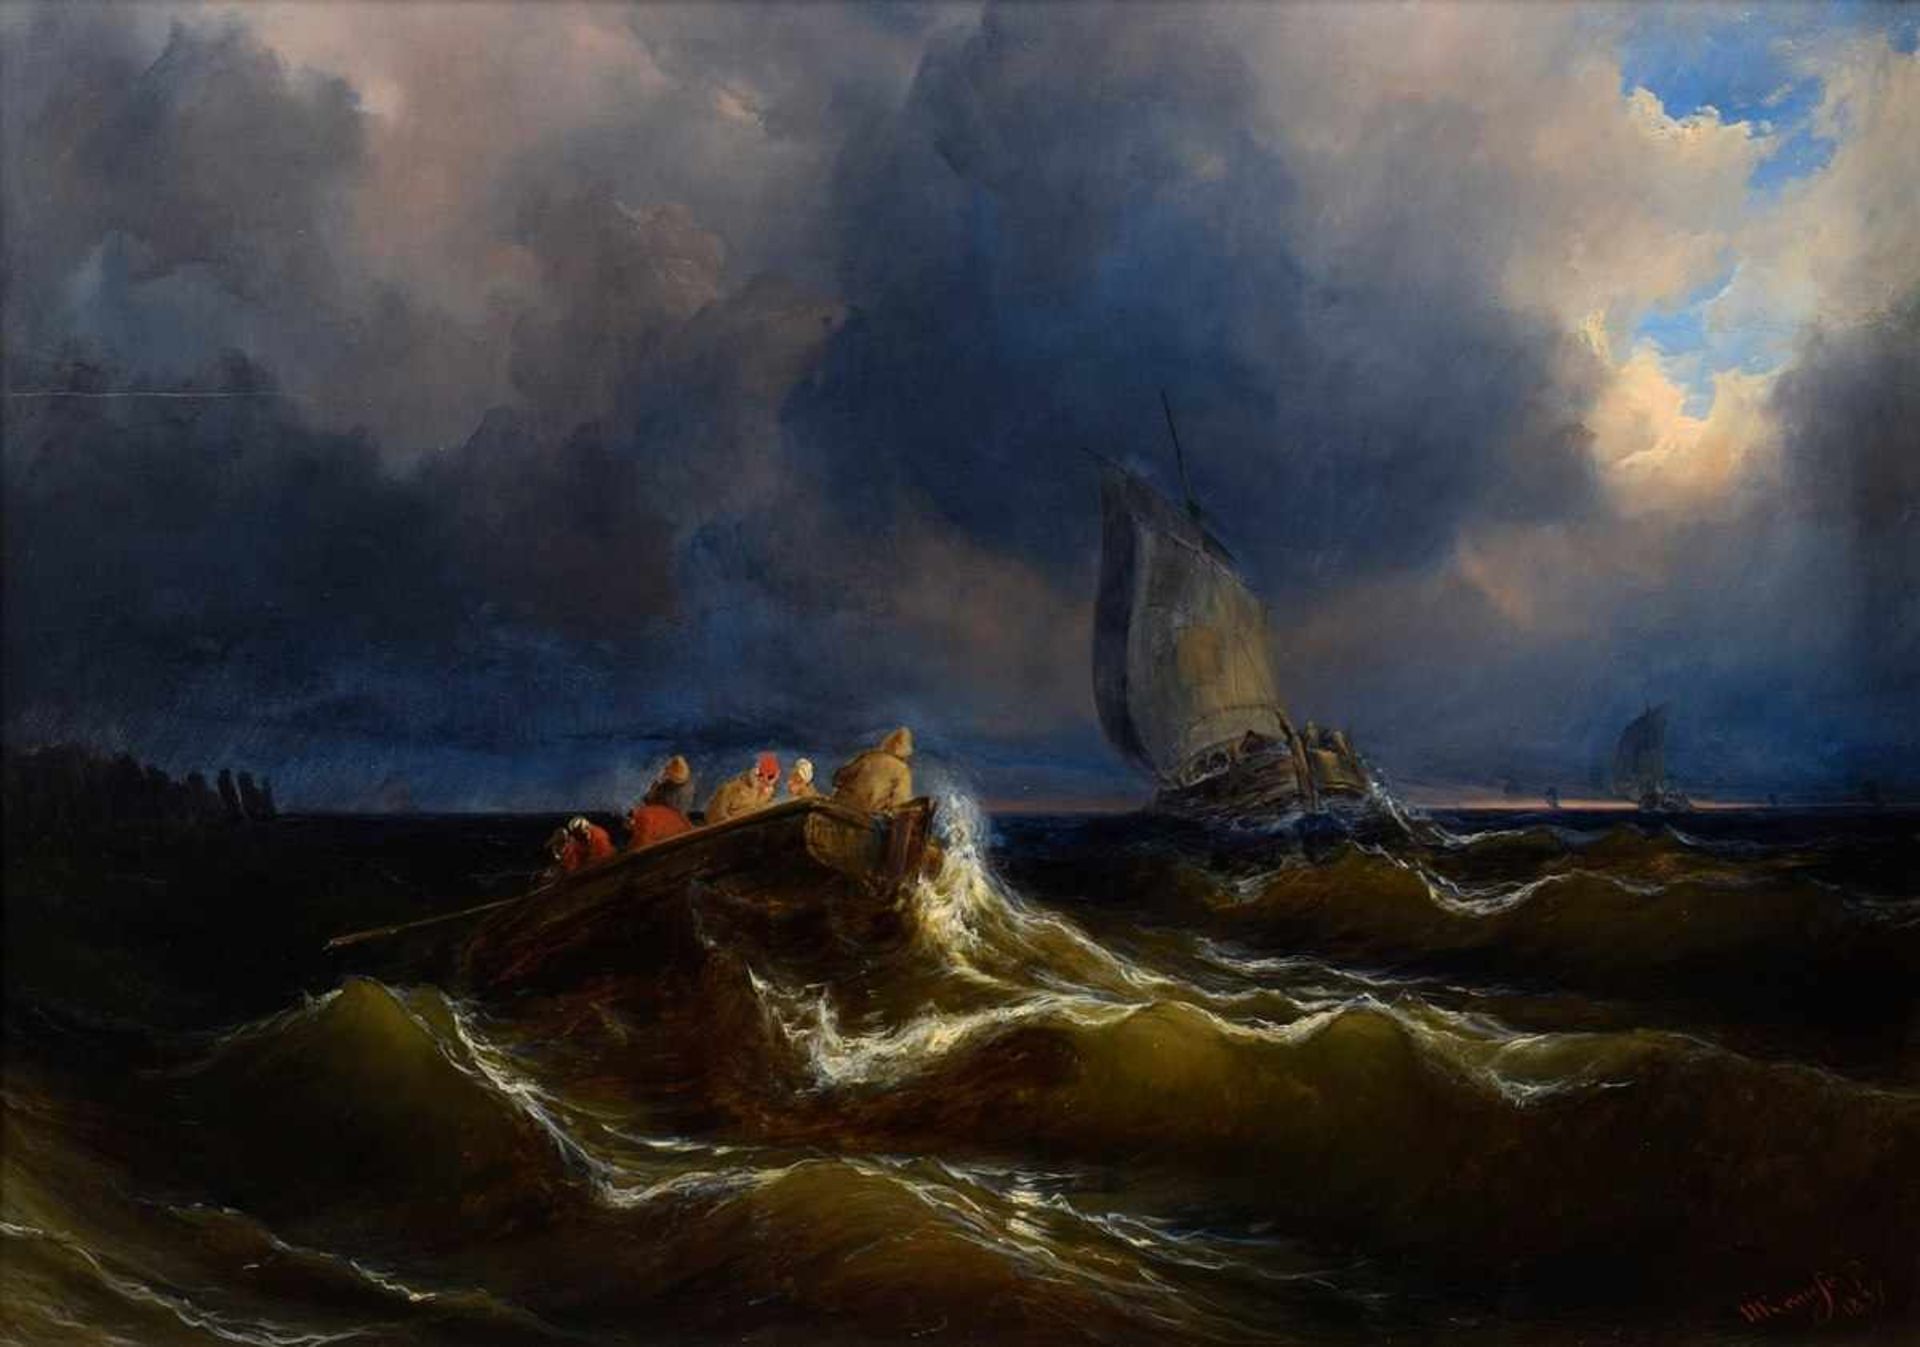 Krause, Wilhelm August (1803-1864) "Fisherman in a stormy sea" 1837, oil/wood, signed/dated lower